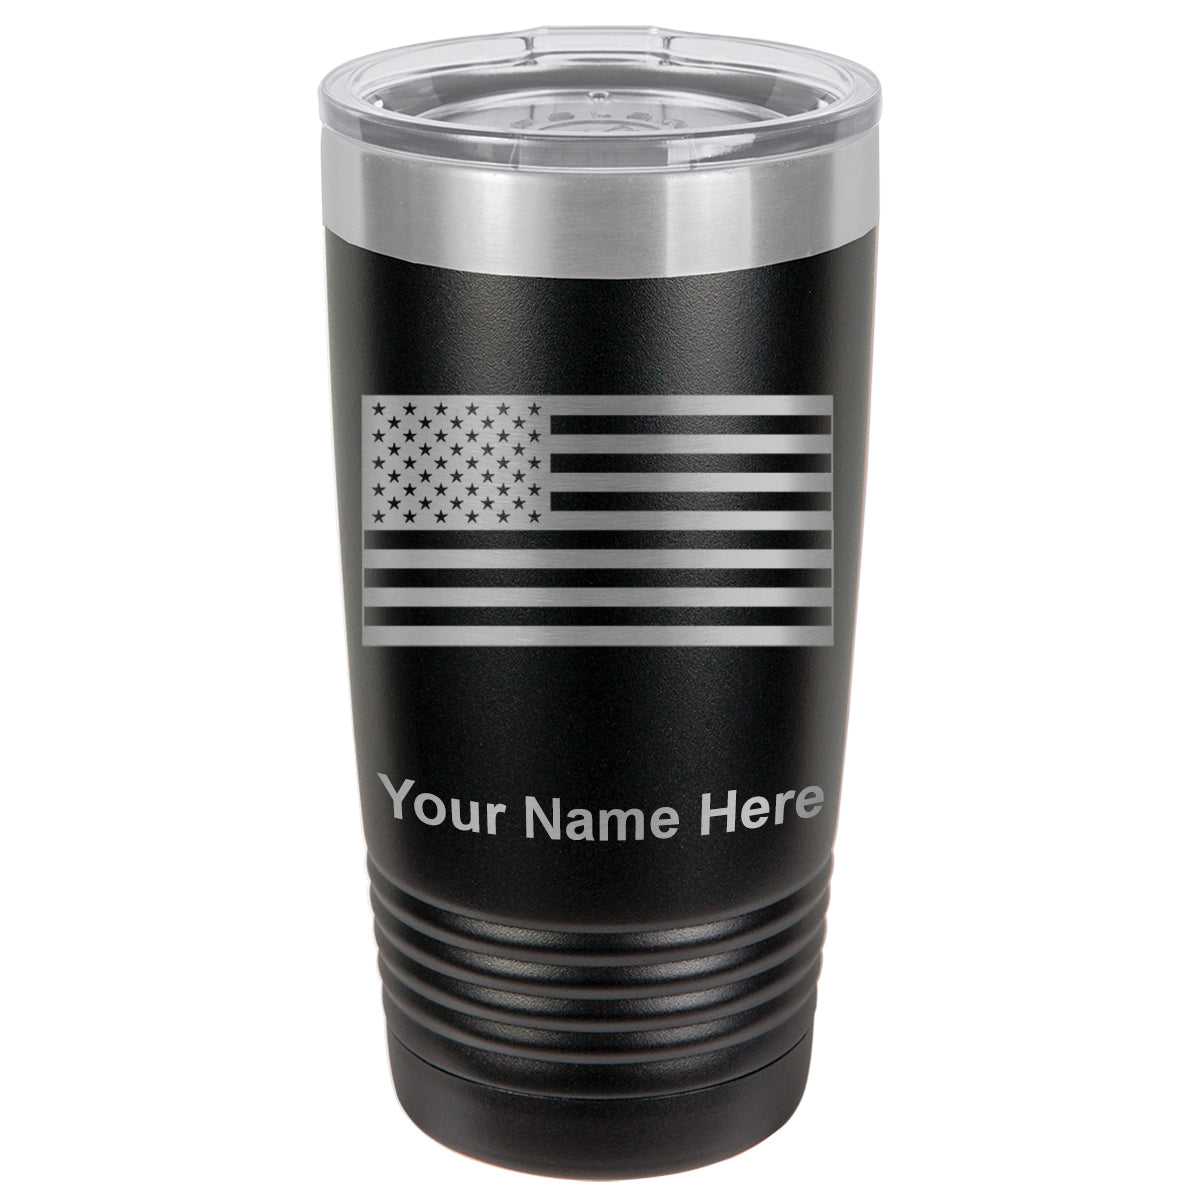 20oz Vacuum Insulated Tumbler Mug, Flag of the United States, Personalized Engraving Included